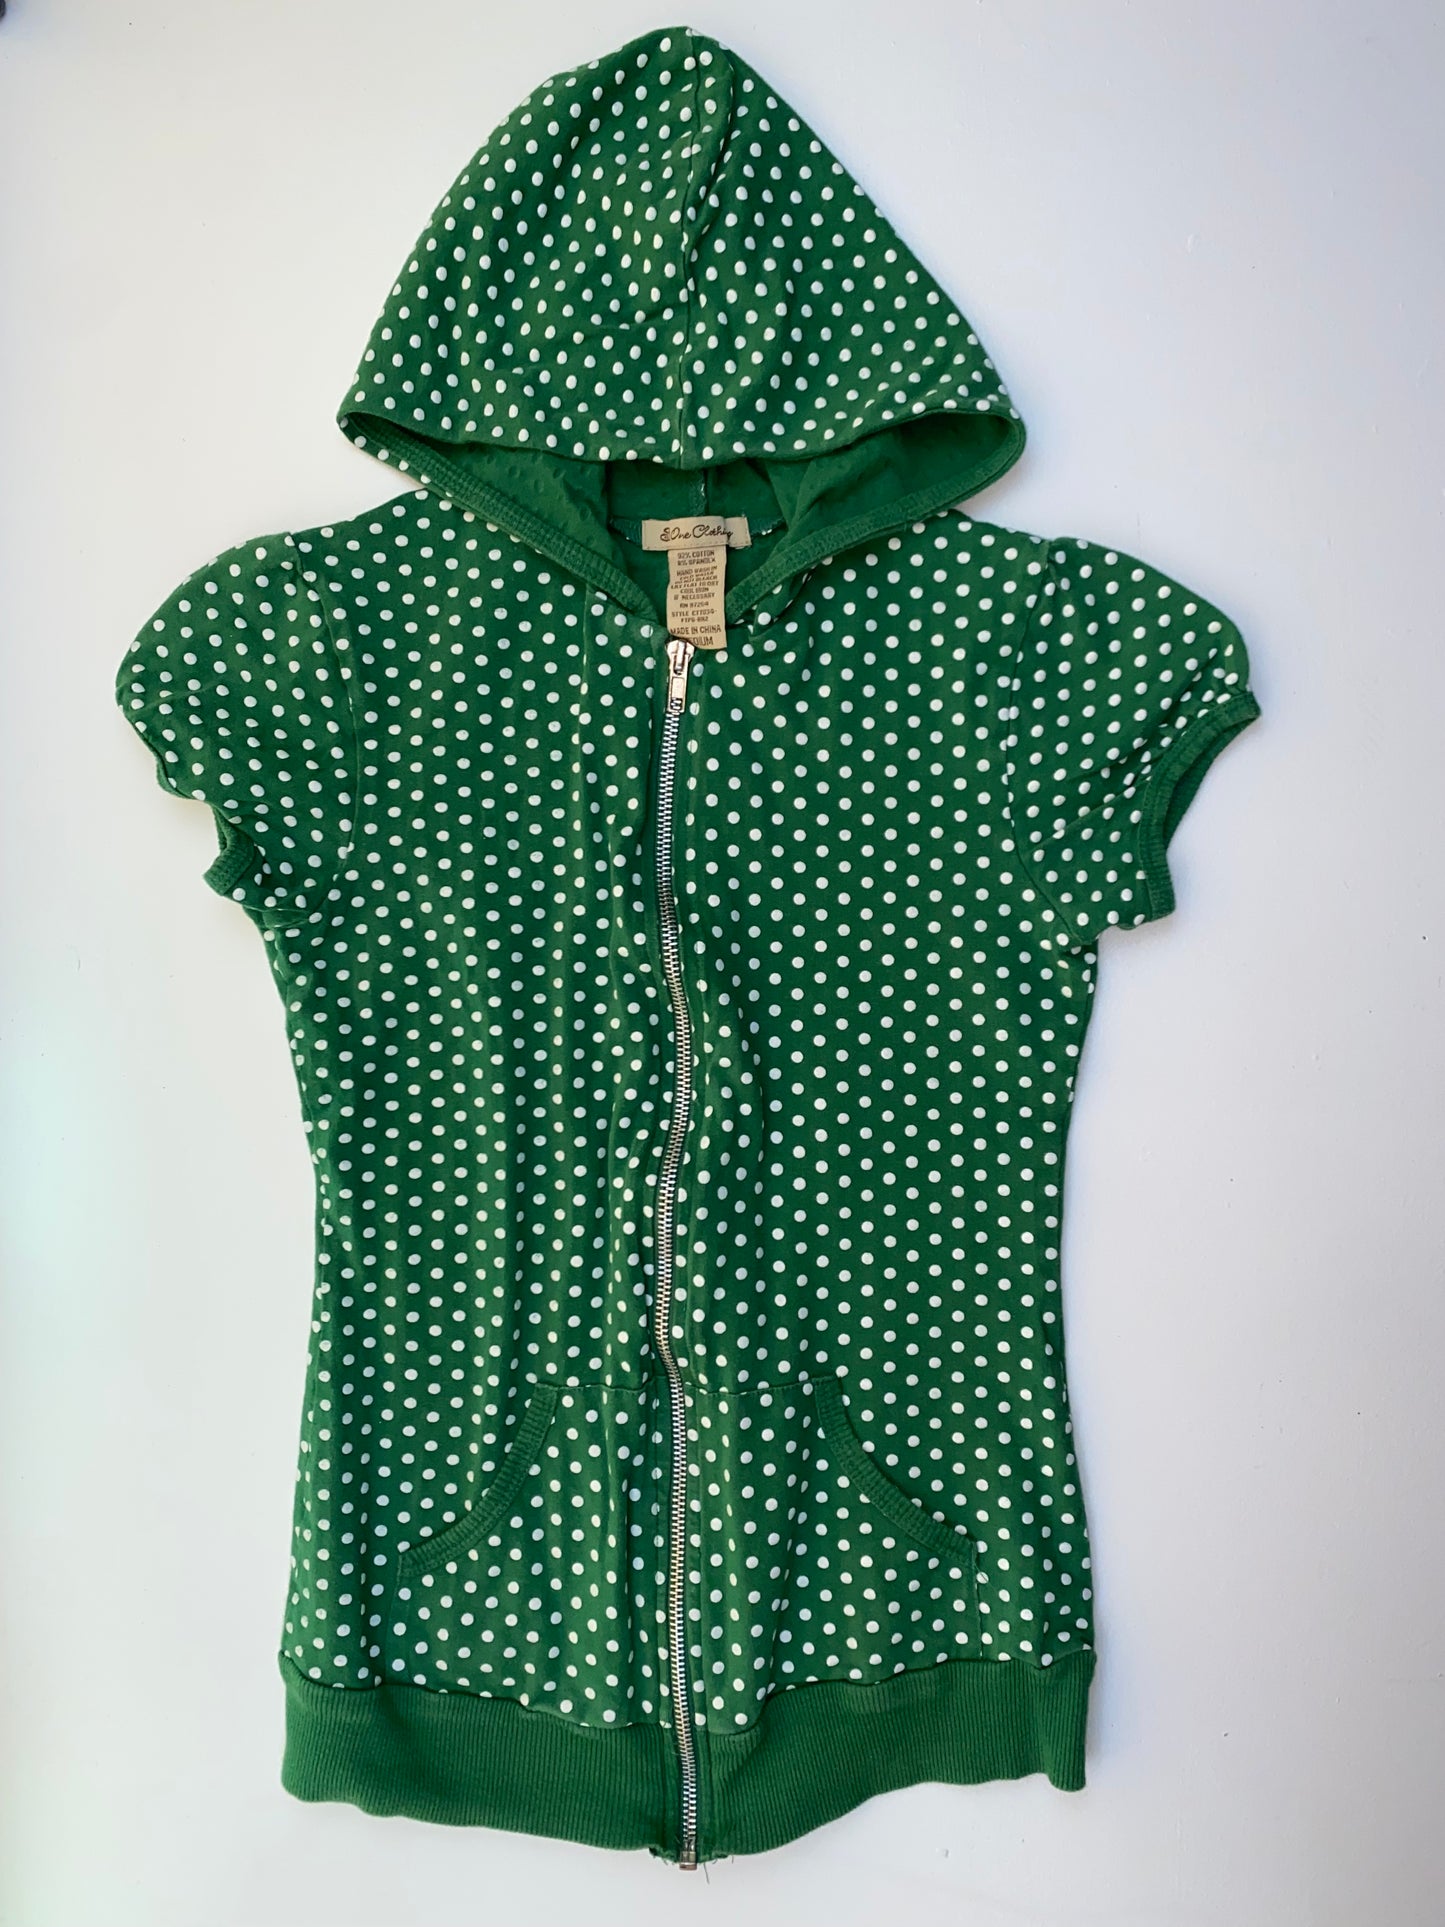 Green Hooded Short Sleeve Zip-Up with White Polka Dots 8